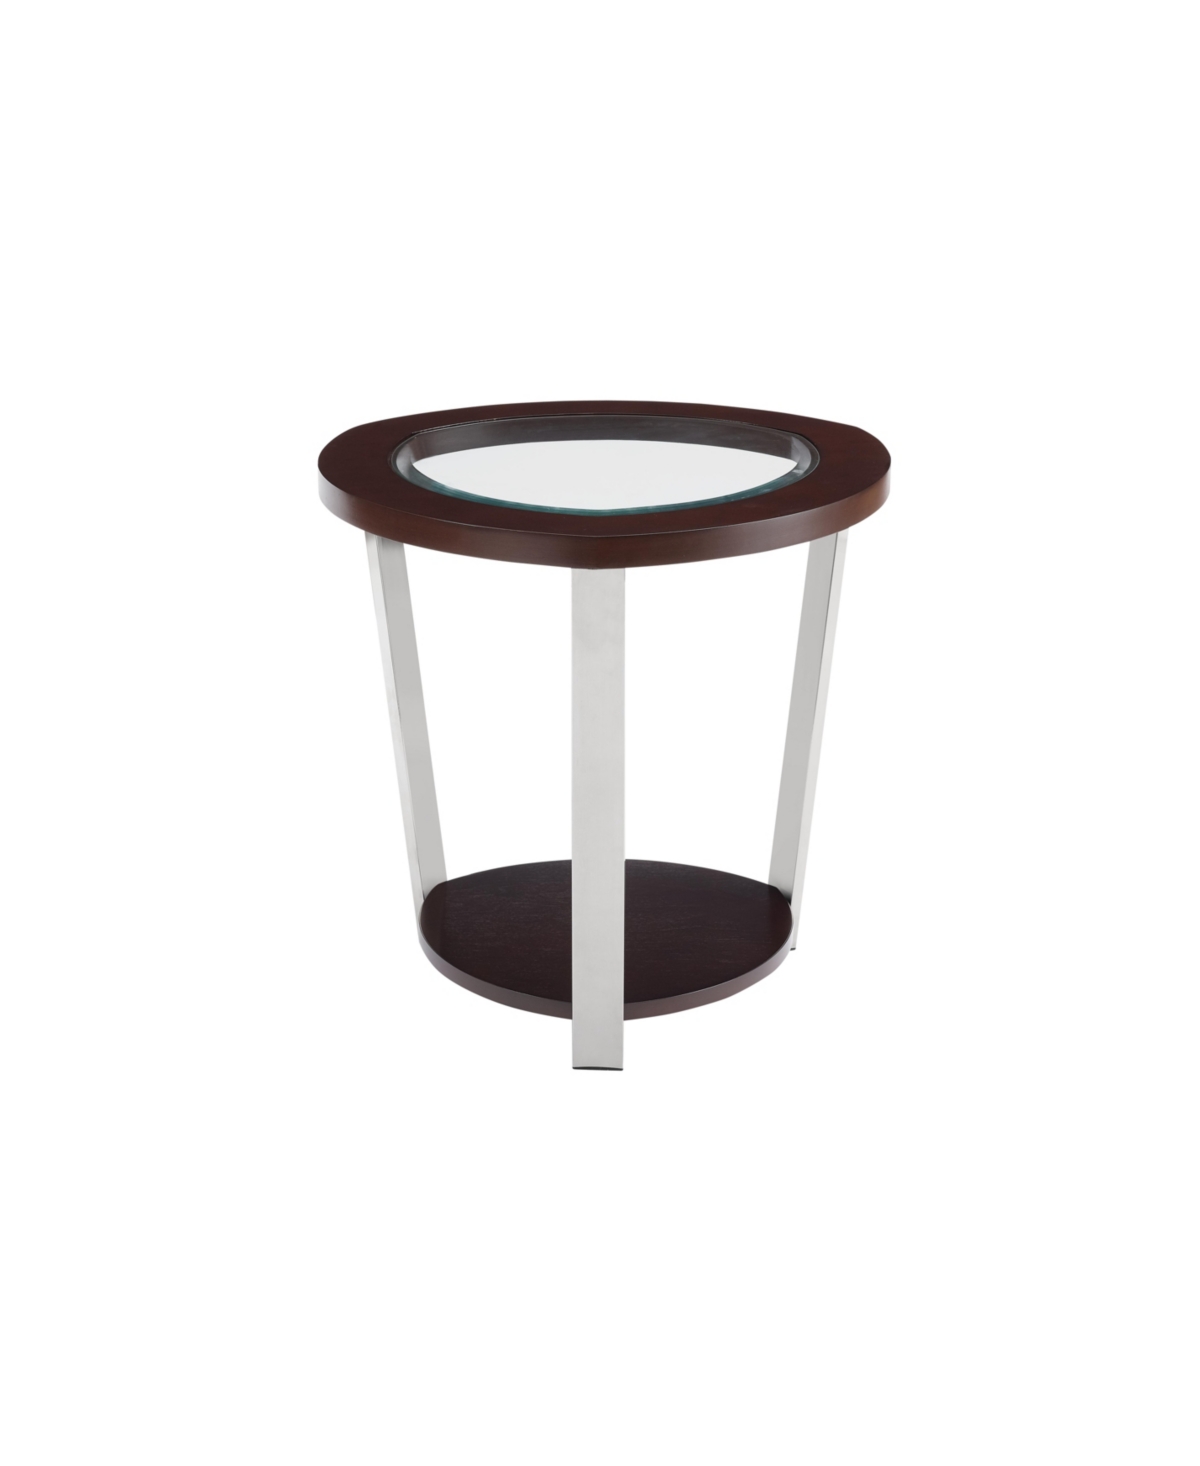 Steve Silver Duncan 23" Round Mixed Media End Table In Espresso Finish